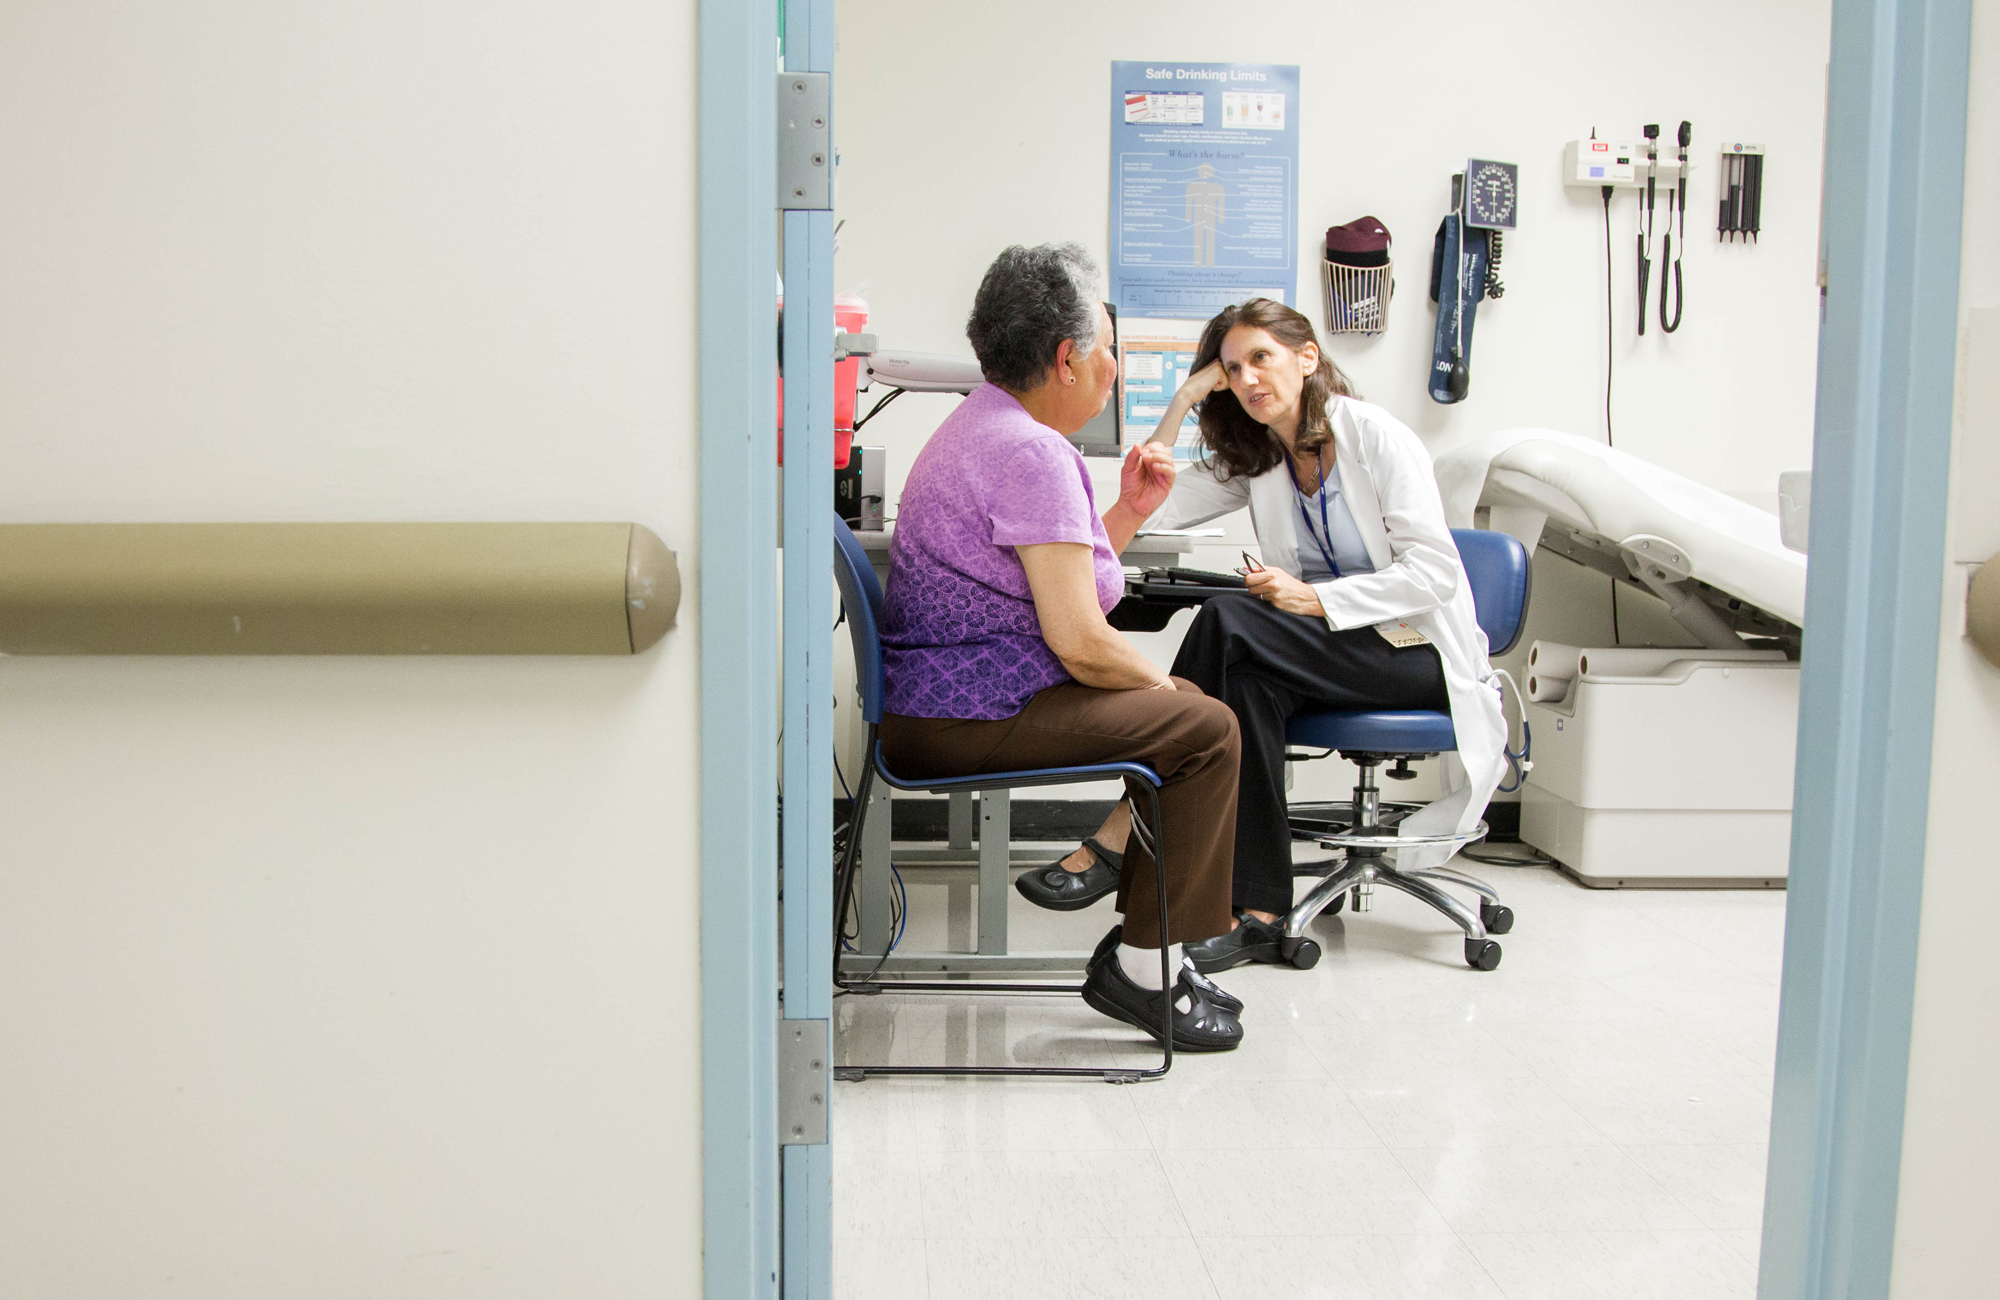 A doctor talks to a patient in a hospital examination room